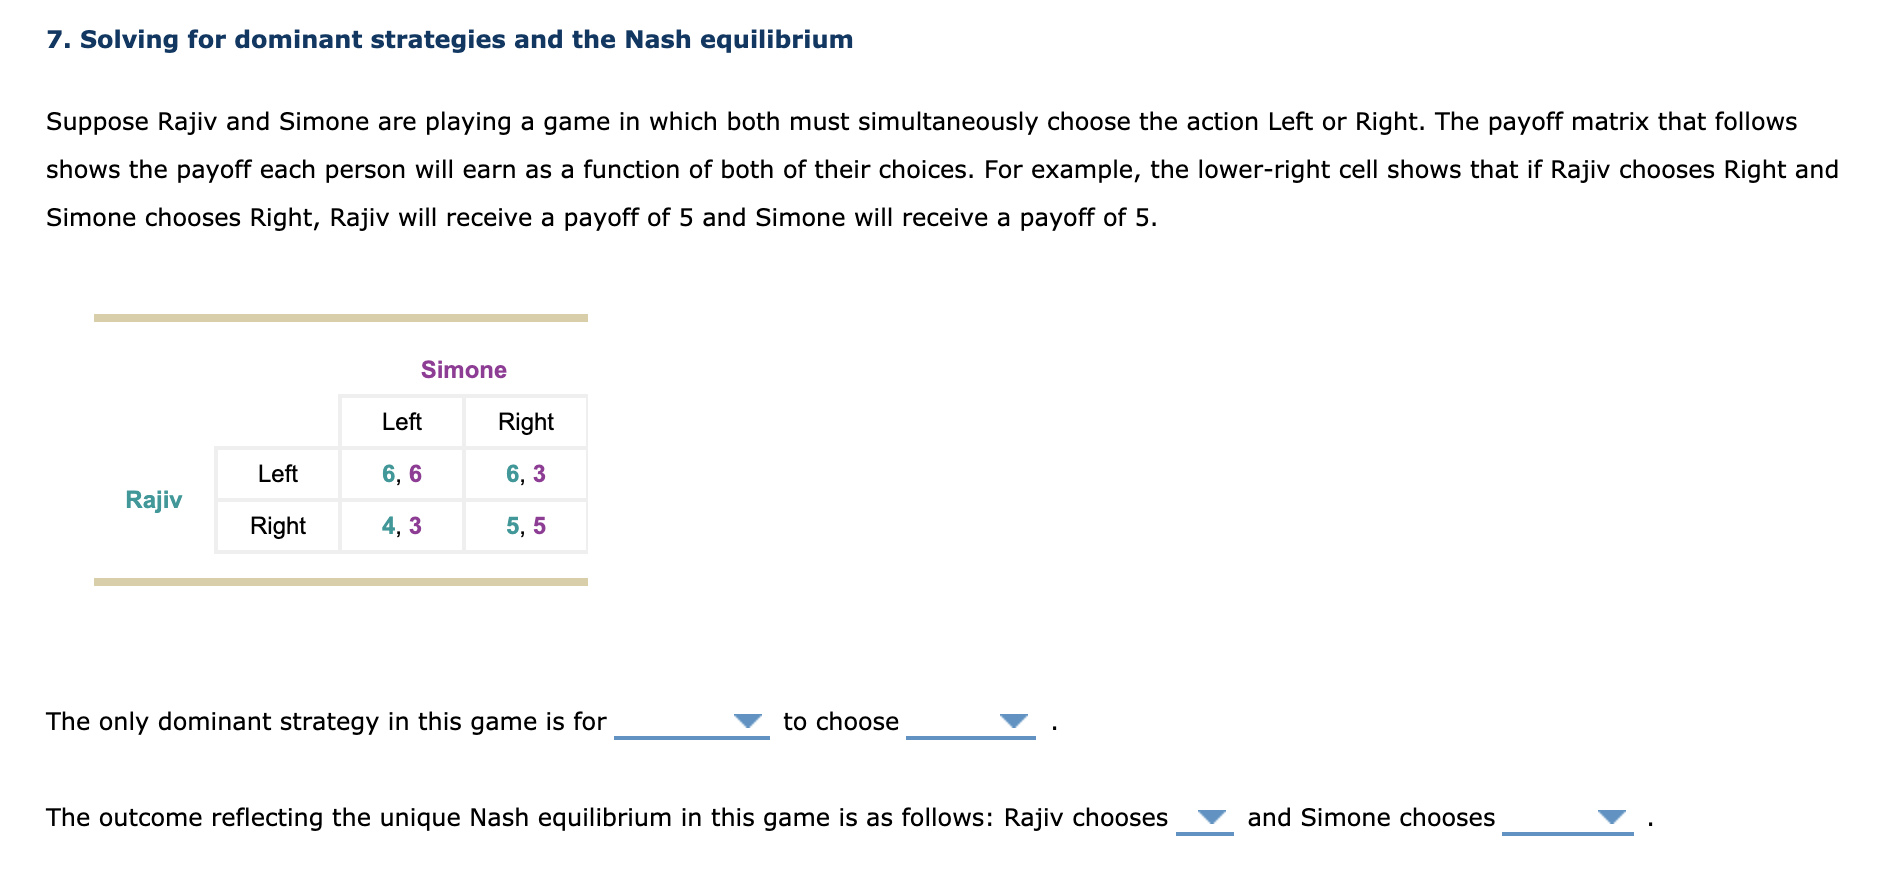 Suppose Rajiv and Simone are playing a game in which both must simultaneously choose the action Left or Right. The payoff matrix that follows
shows the payoff each person will earn as a function of both of their choices. For example, the lower-right cell shows that if Rajiv chooses Right and
Simone chooses Right, Rajiv will receive a payoff of 5 and Simone will receive a payoff of 5.
Simone
Left
Right
Left
6, 6
6, 3
Rajiv
Right
4, 3
5, 5
The only dominant strategy in this game is for
to choose
The outcome reflecting the unique Nash equilibrium in this game is as follows: Rajiv chooses
and Simone chooses
